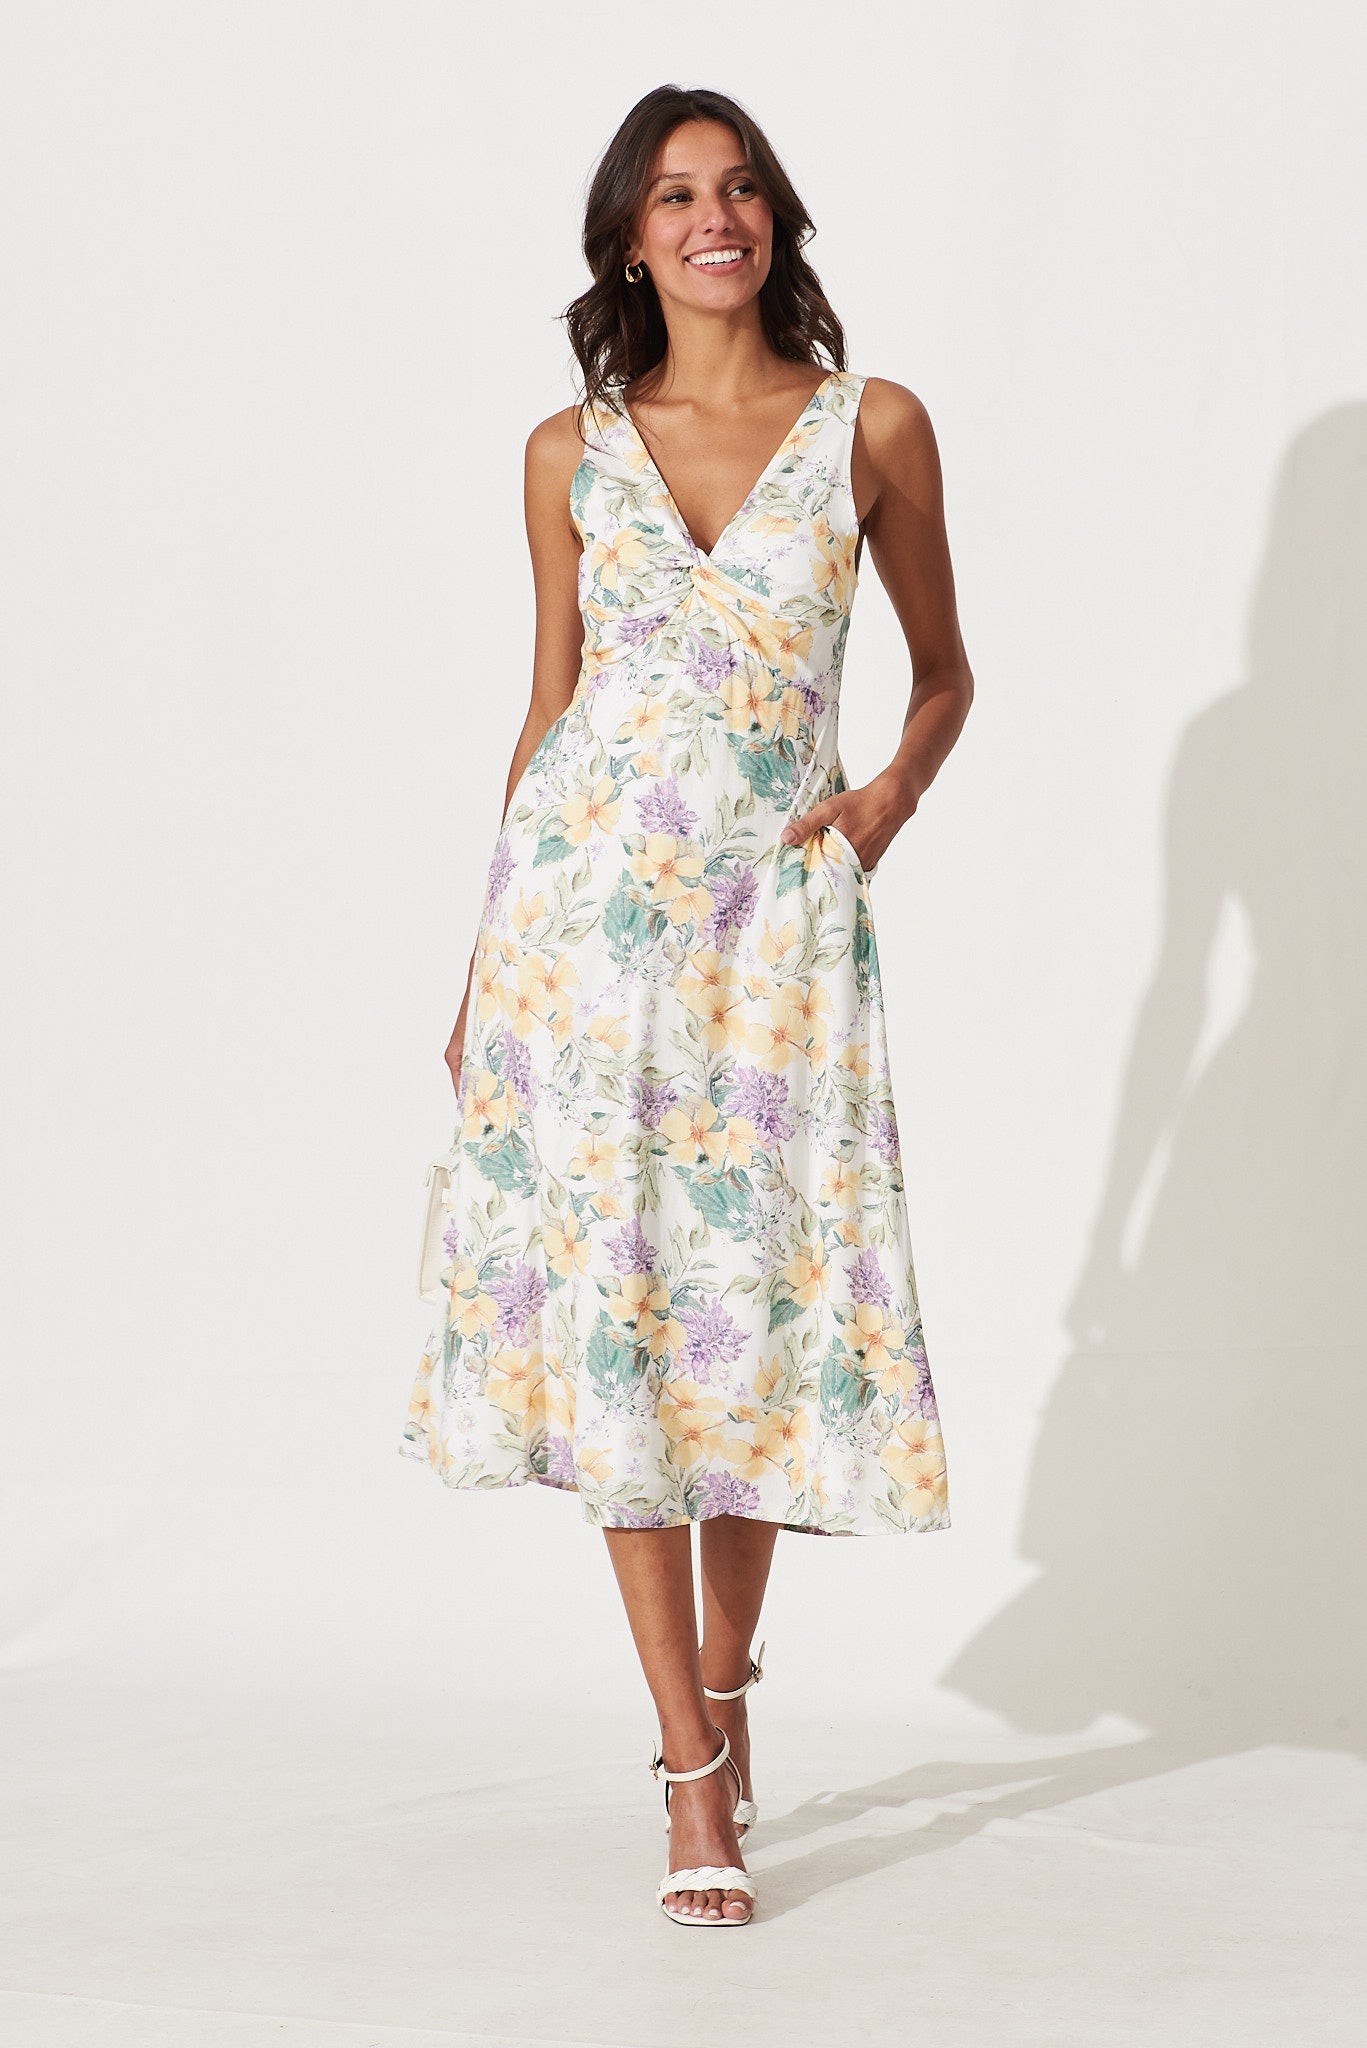 Tropicana Midi Dress In White With Multi Floral Print - full length